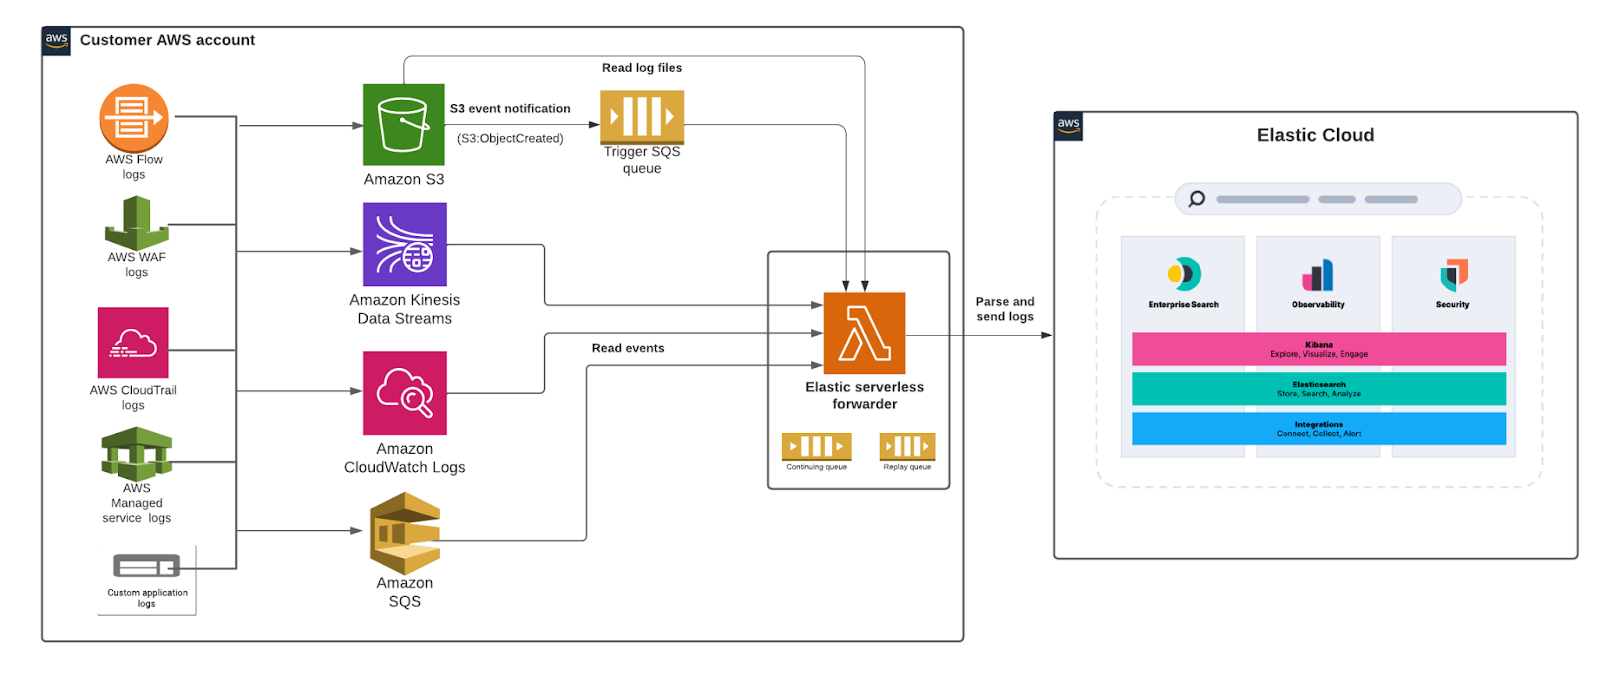 Overview of AWS environment with Elastic serverless forwarder